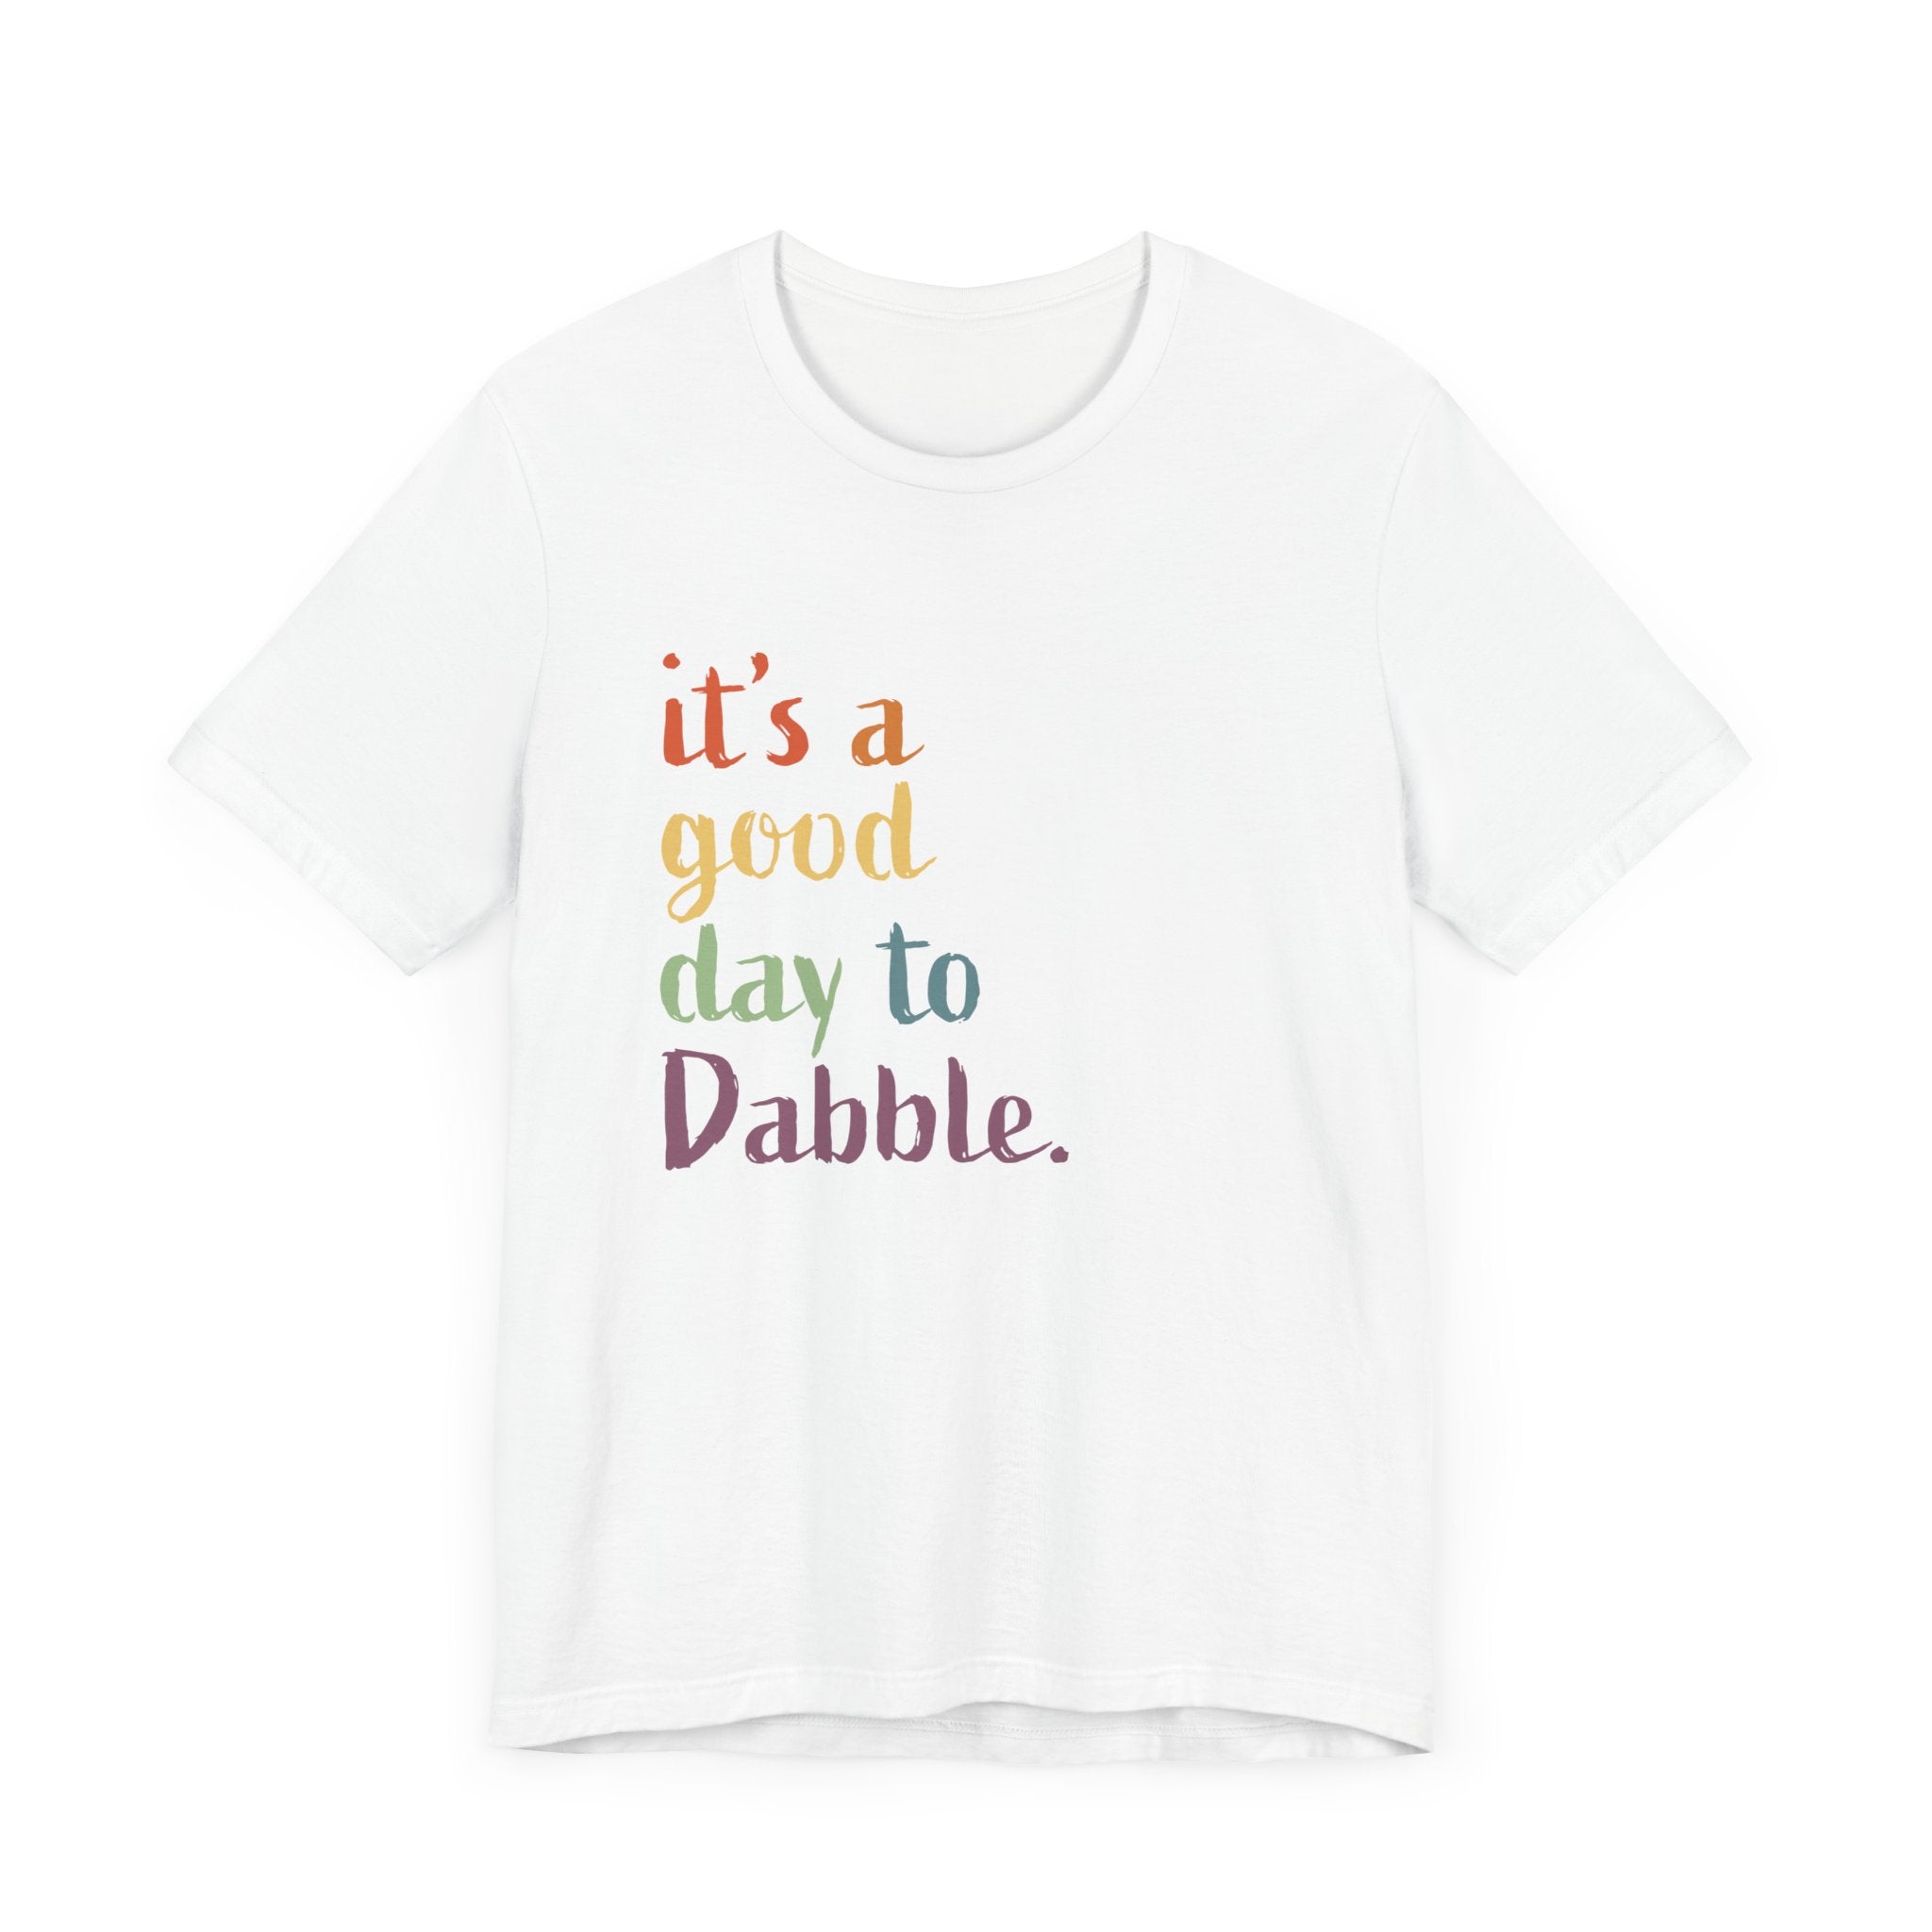 it's a good day to Dabble Short Sleeve Tee